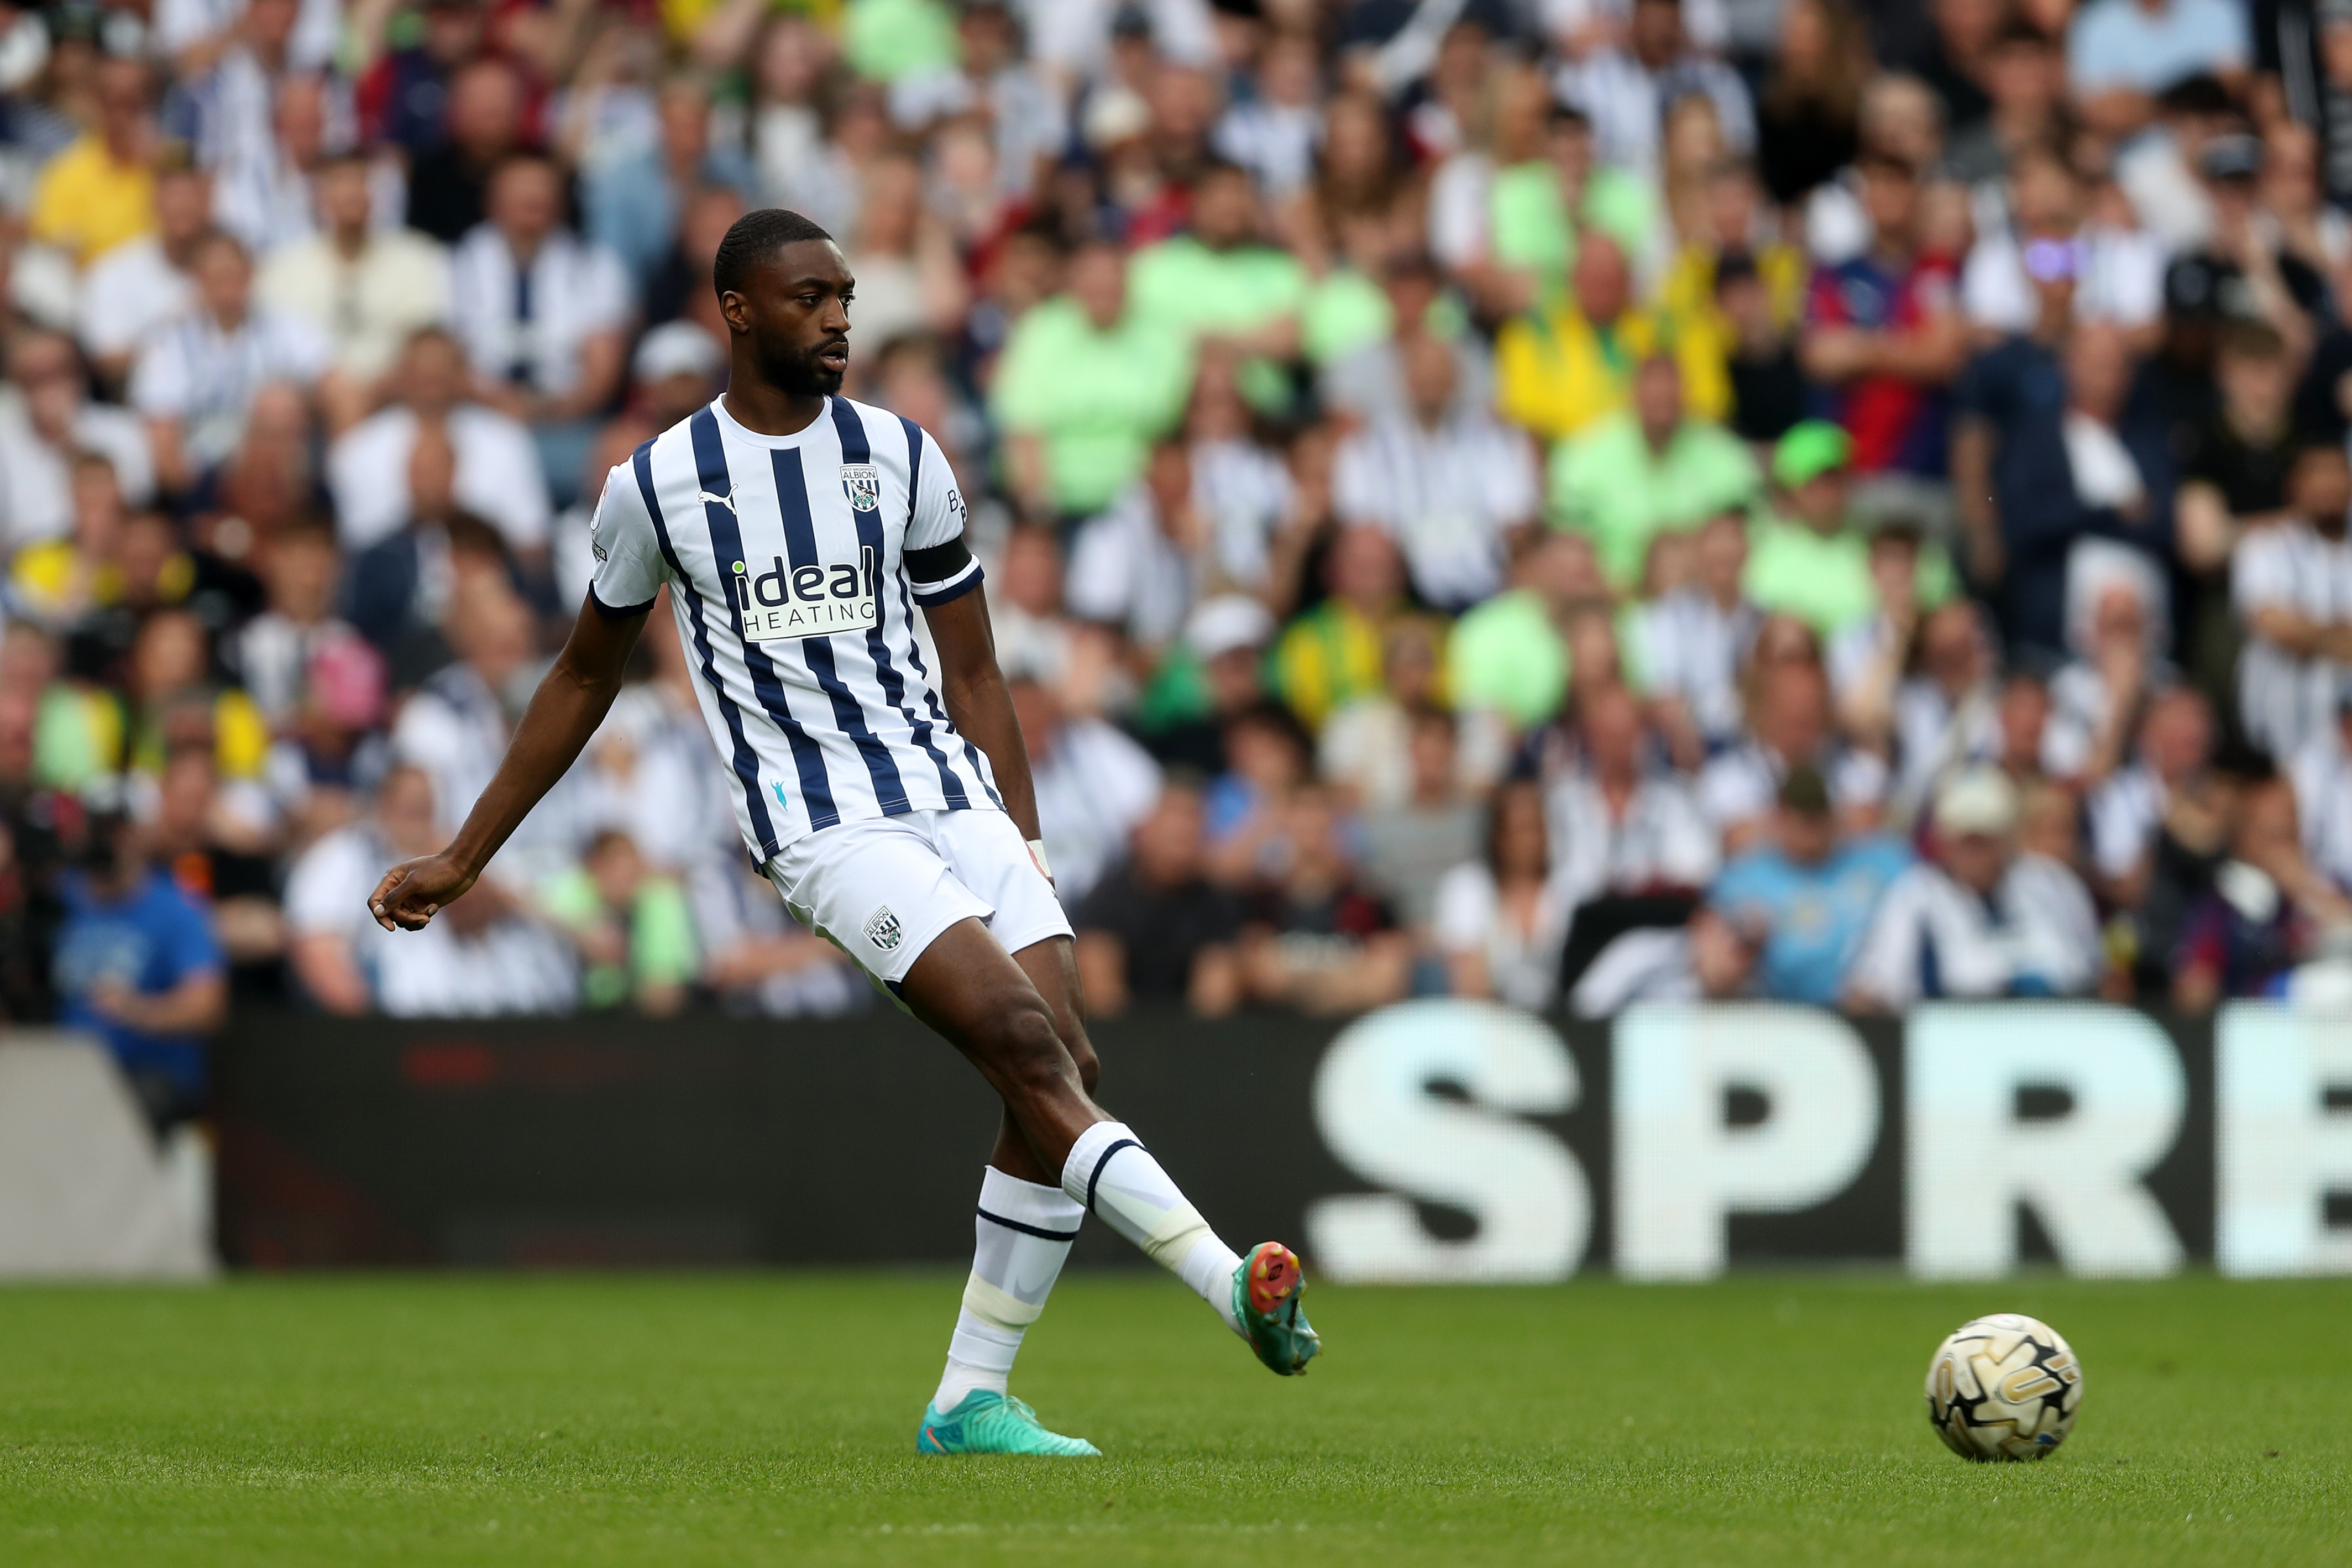 Semi Ajayi passing the ball against Southampton at The Hawthorns 